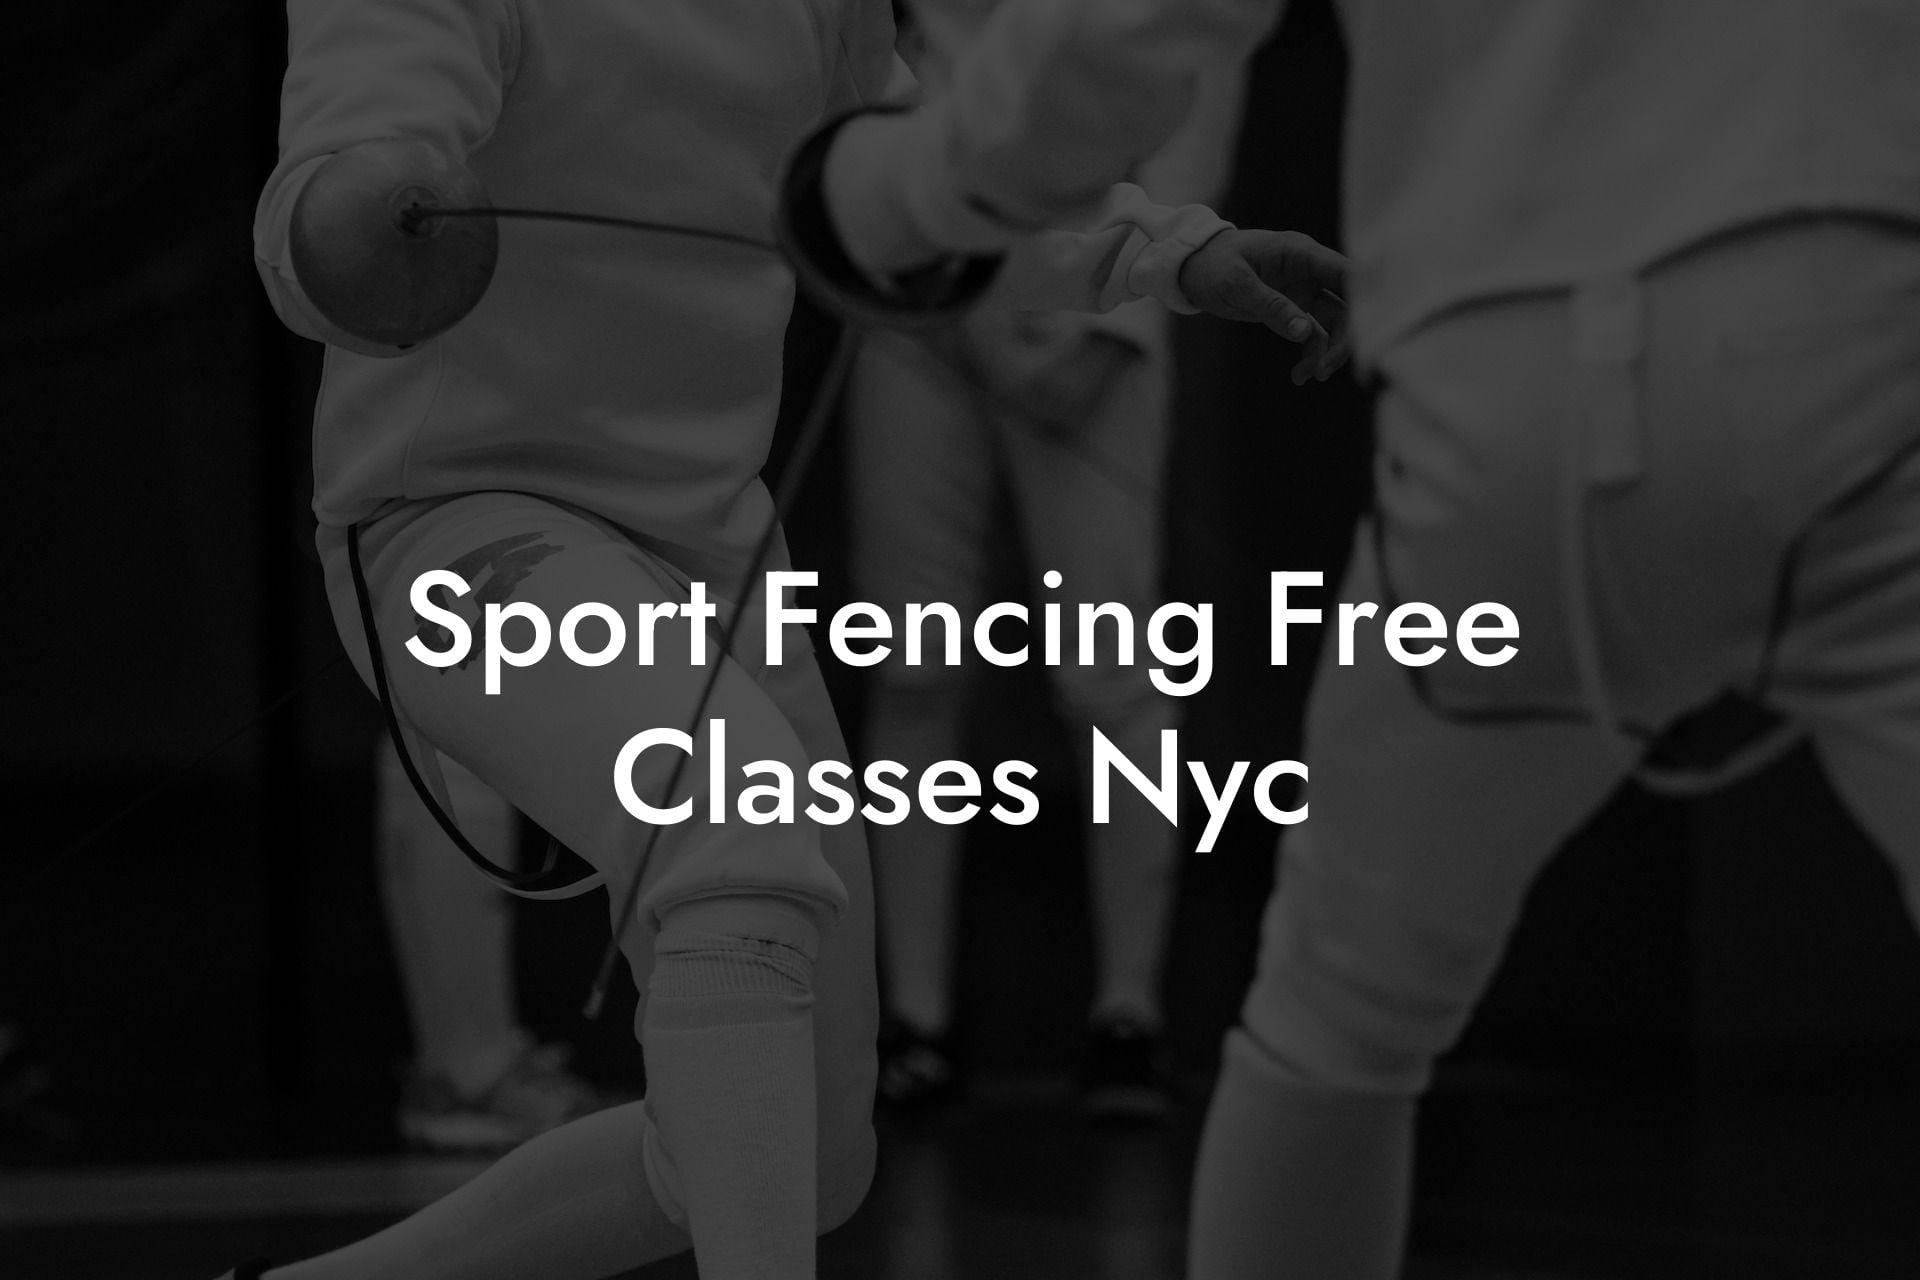 Sport Fencing Free Classes Nyc